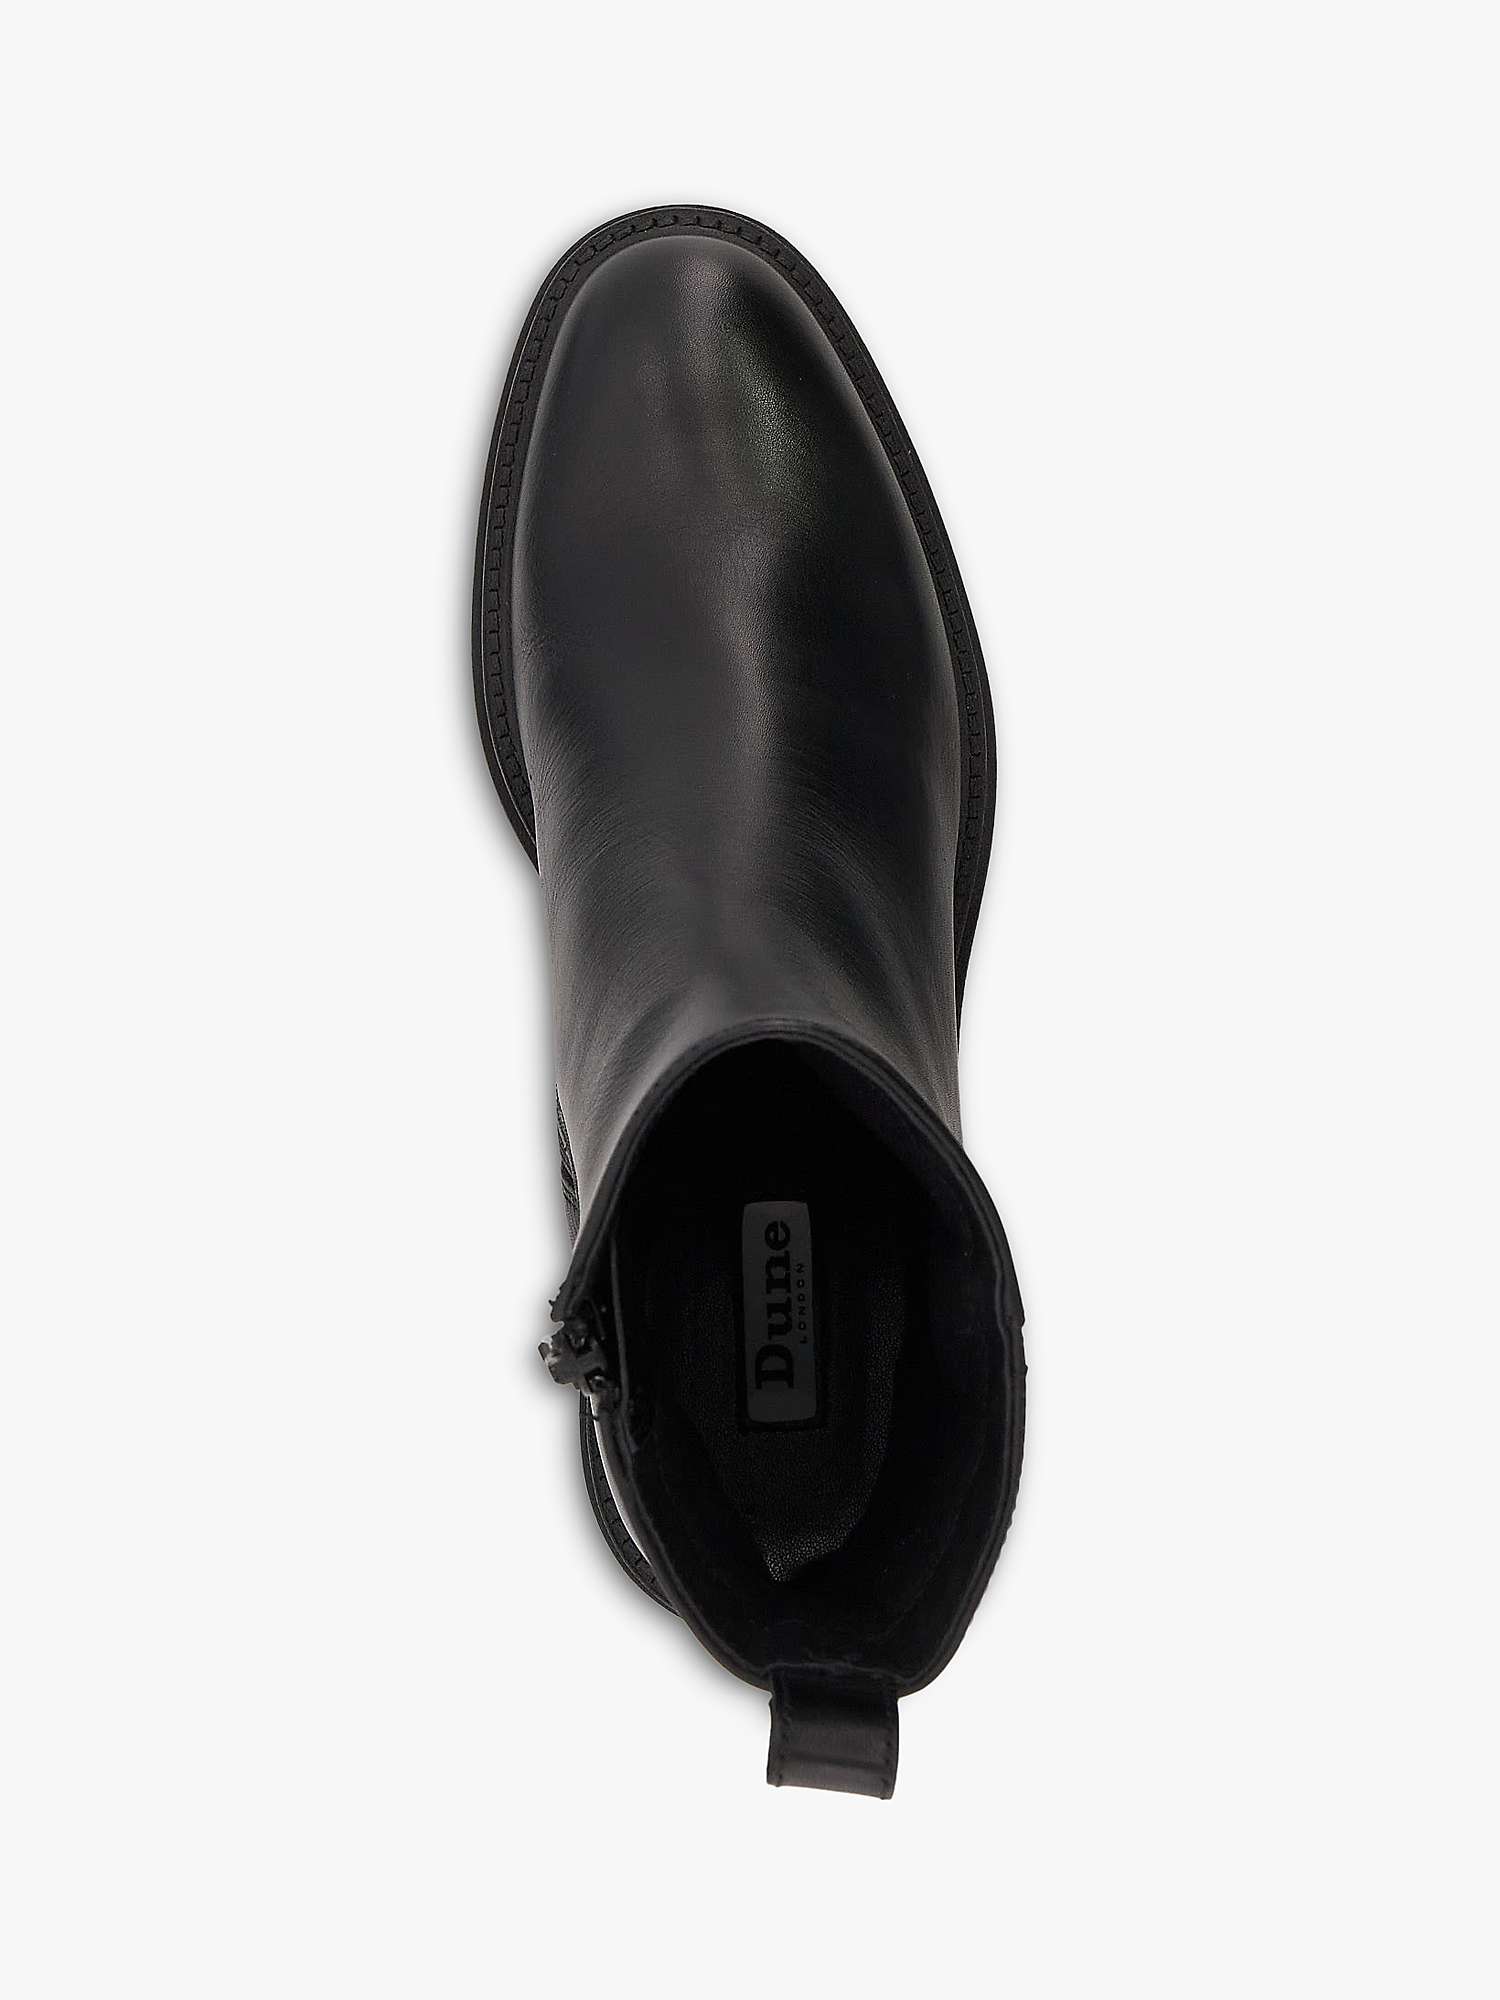 Buy Dune Possessive Leather Ankle Boots Online at johnlewis.com